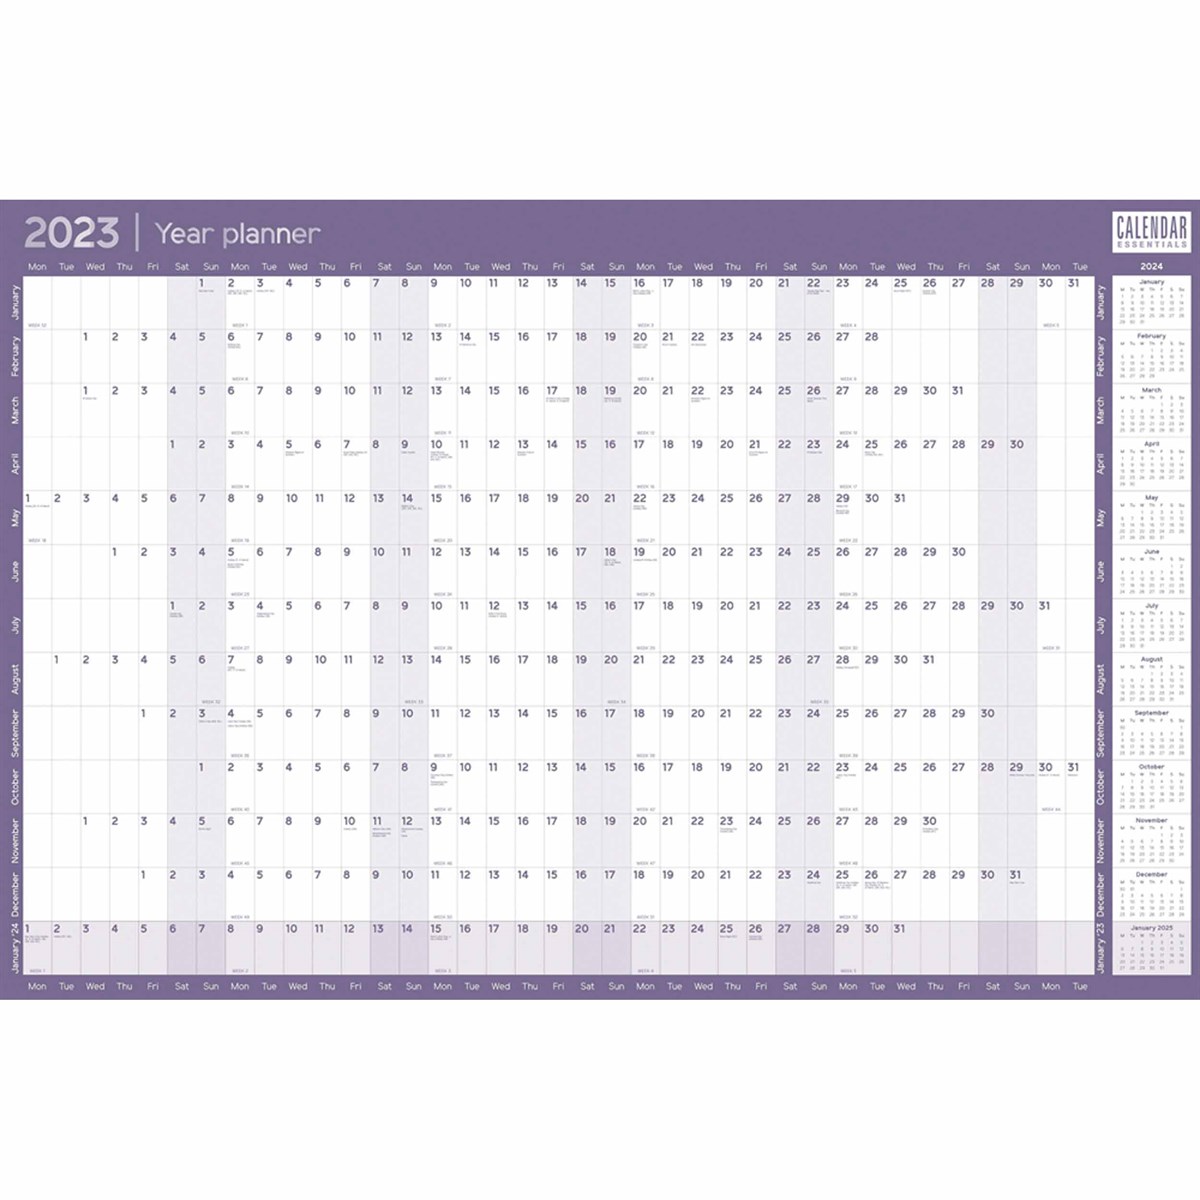 Essential A1 Poster Planner 2023